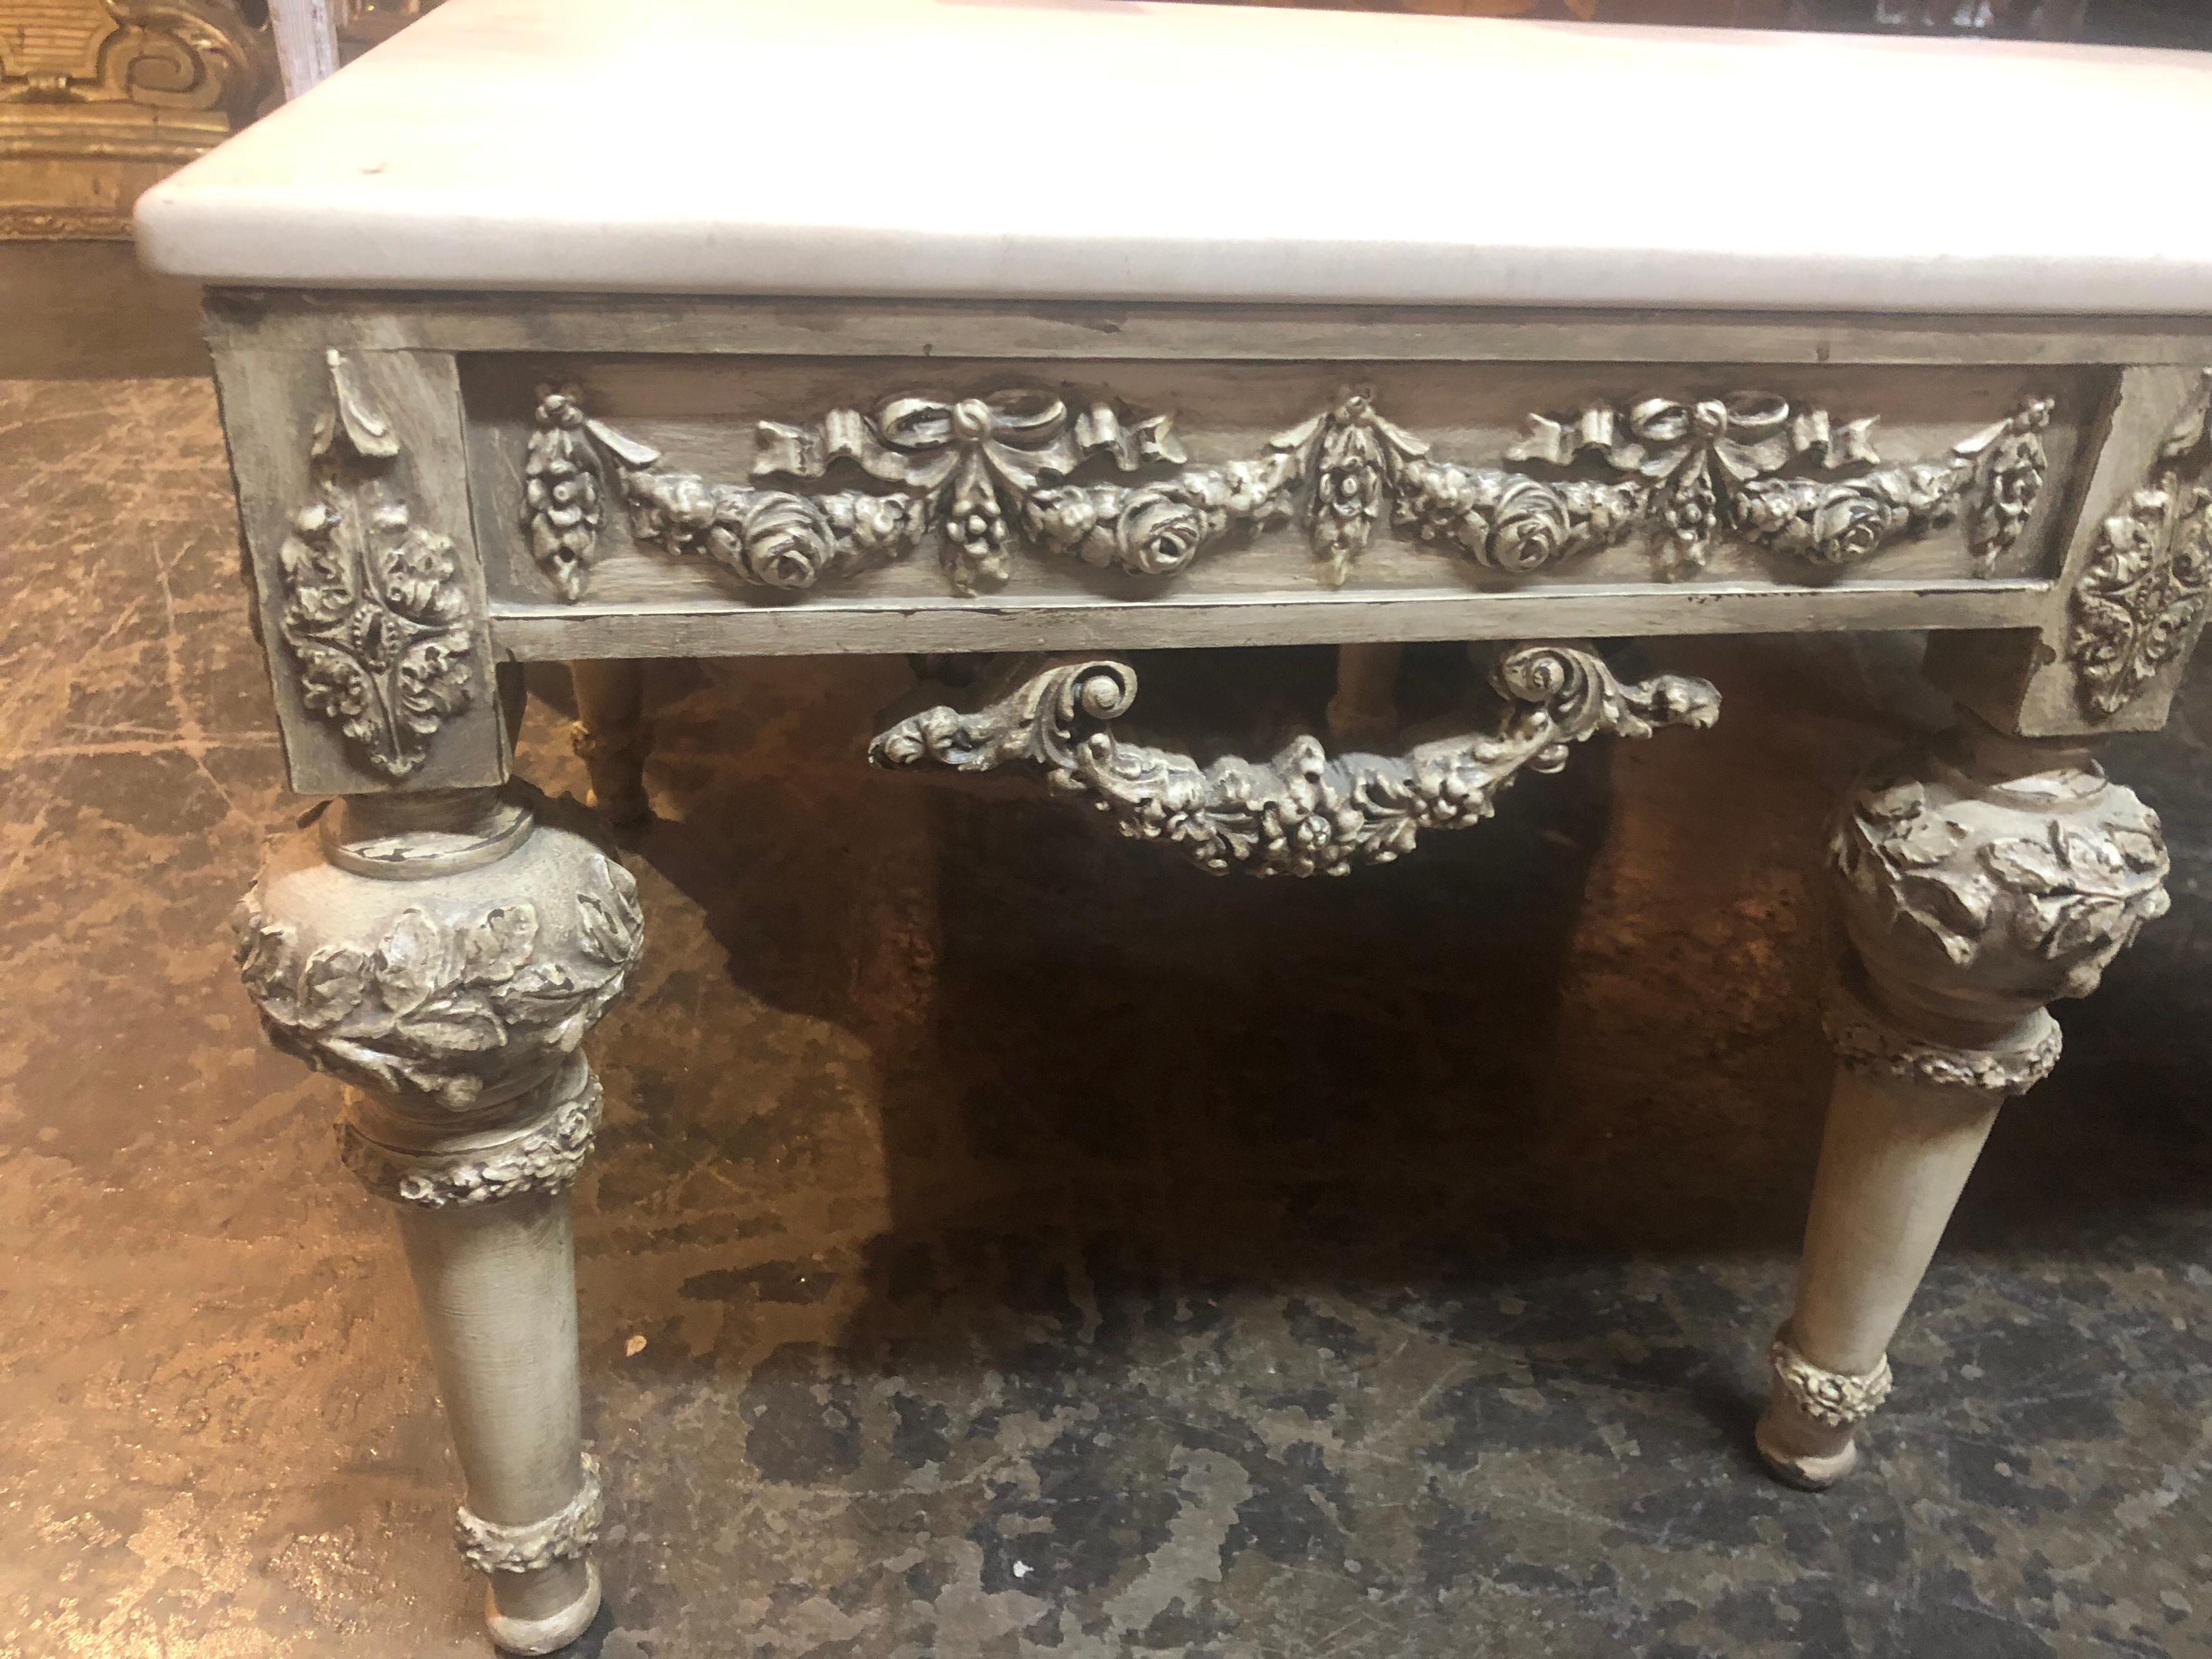 Beautifully carved Italian coffee table with a marble top. Carvings on this piece are very intricate. Impressive!